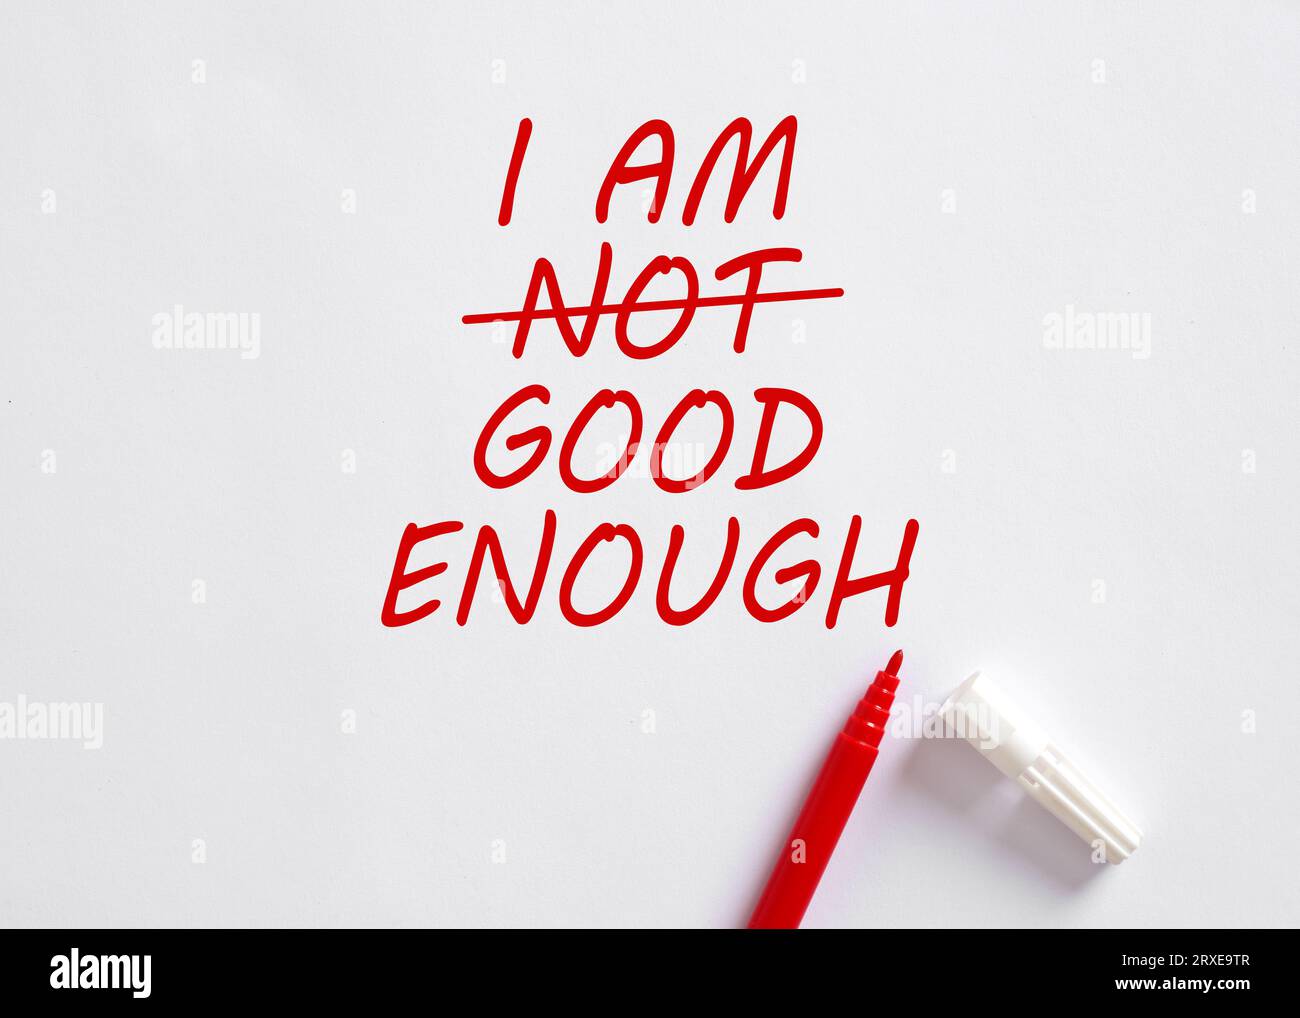 I AM NOT GOOD ENOUGH changed to I AM GOOD ENOUGH. Building self esteem, self respect and embrace personal imperfections. To overcome negative mindset. Stock Photo